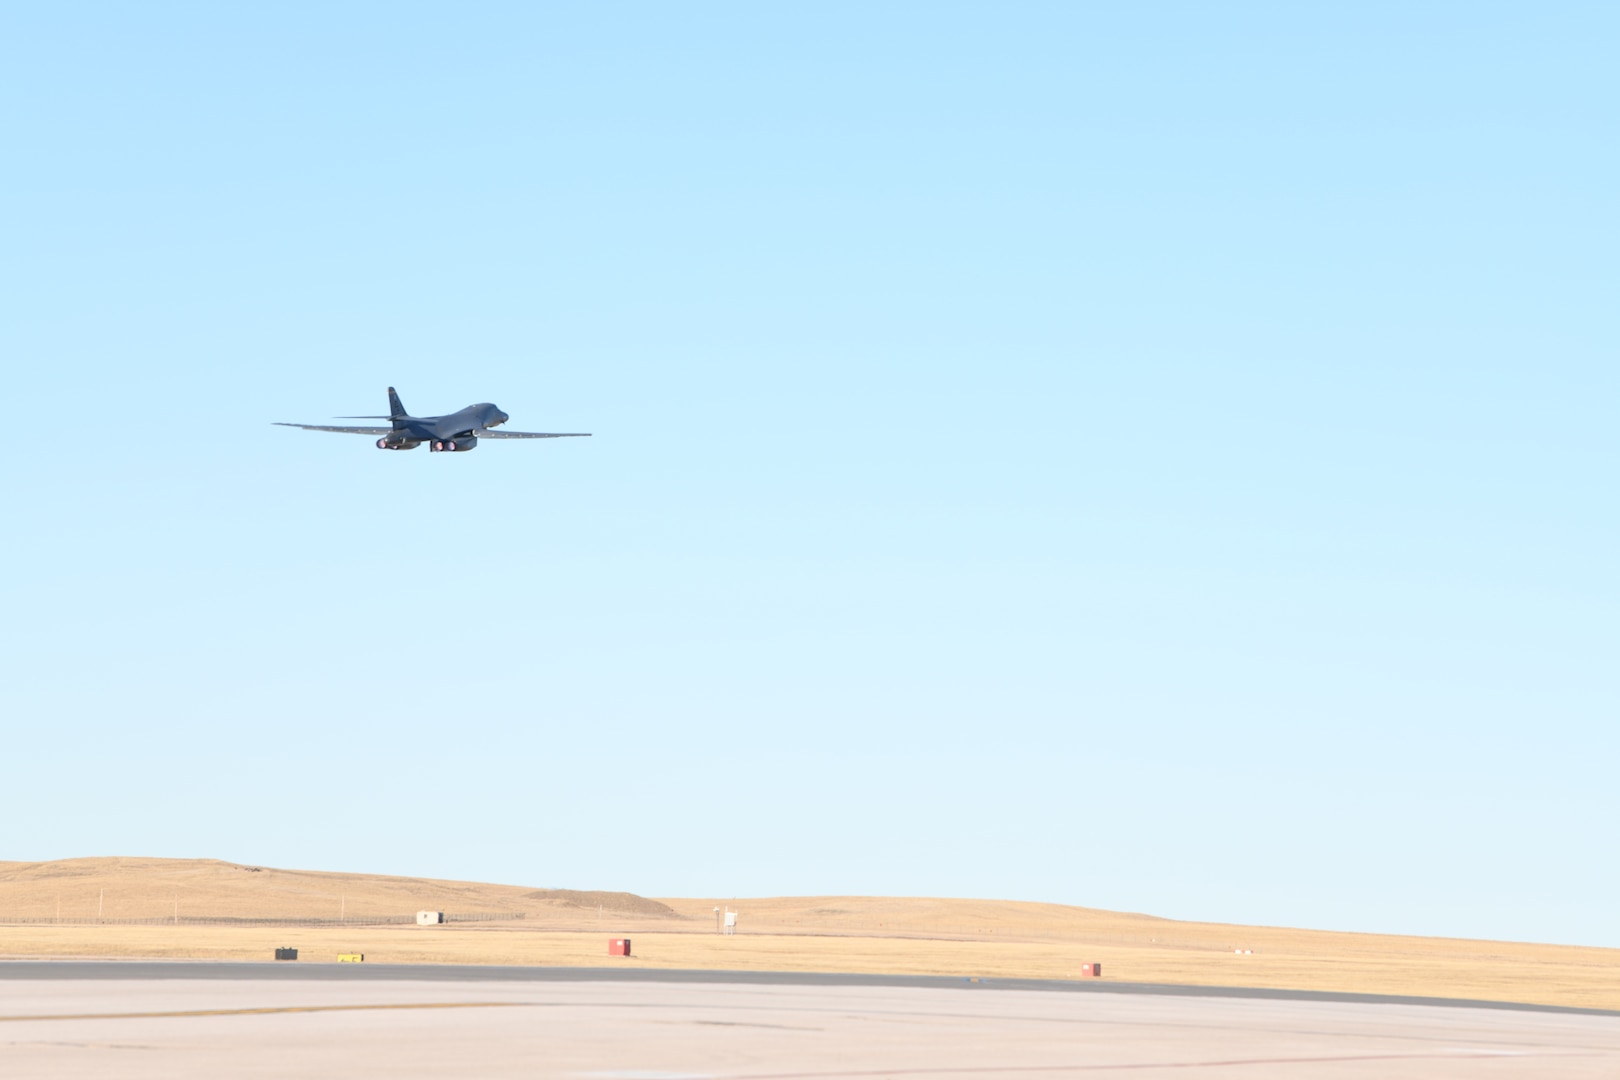 A U.S. Air Force B-1B Lancer assigned to the 28th Bomb Wing launches in support of a Bomber Task Force deployment from Ellsworth Air Force Base, S.D., Dec. 4, 2020. The dynamic force employment model empowers a small but agile footprint of maintenance personnel to generate airpower at locations across the globe. (U.S. Air Force photo by Staff Sgt. Nicolas Z. Erwin)